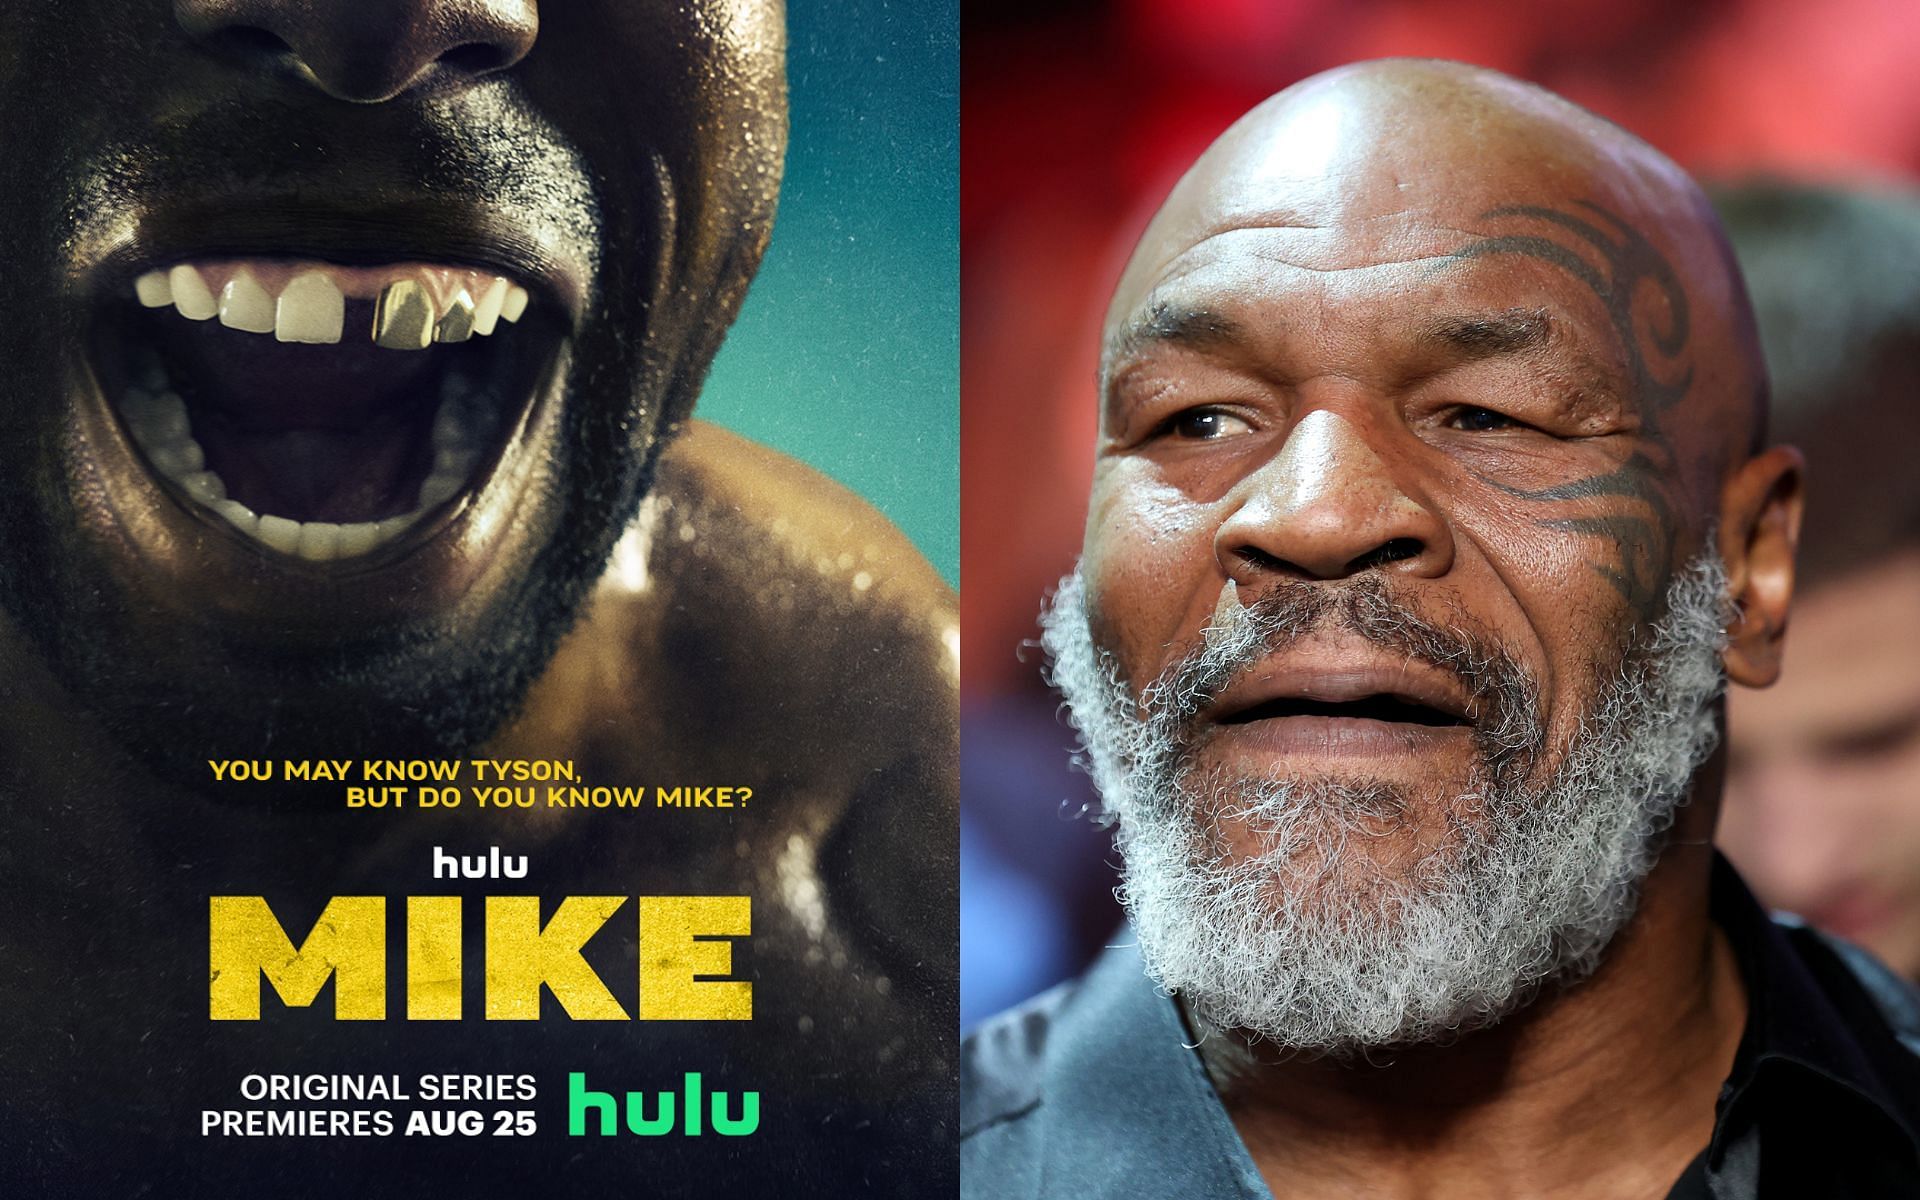 MIKE poster (left), Mike Tyson (right) [Image via @hulu on Twitter]